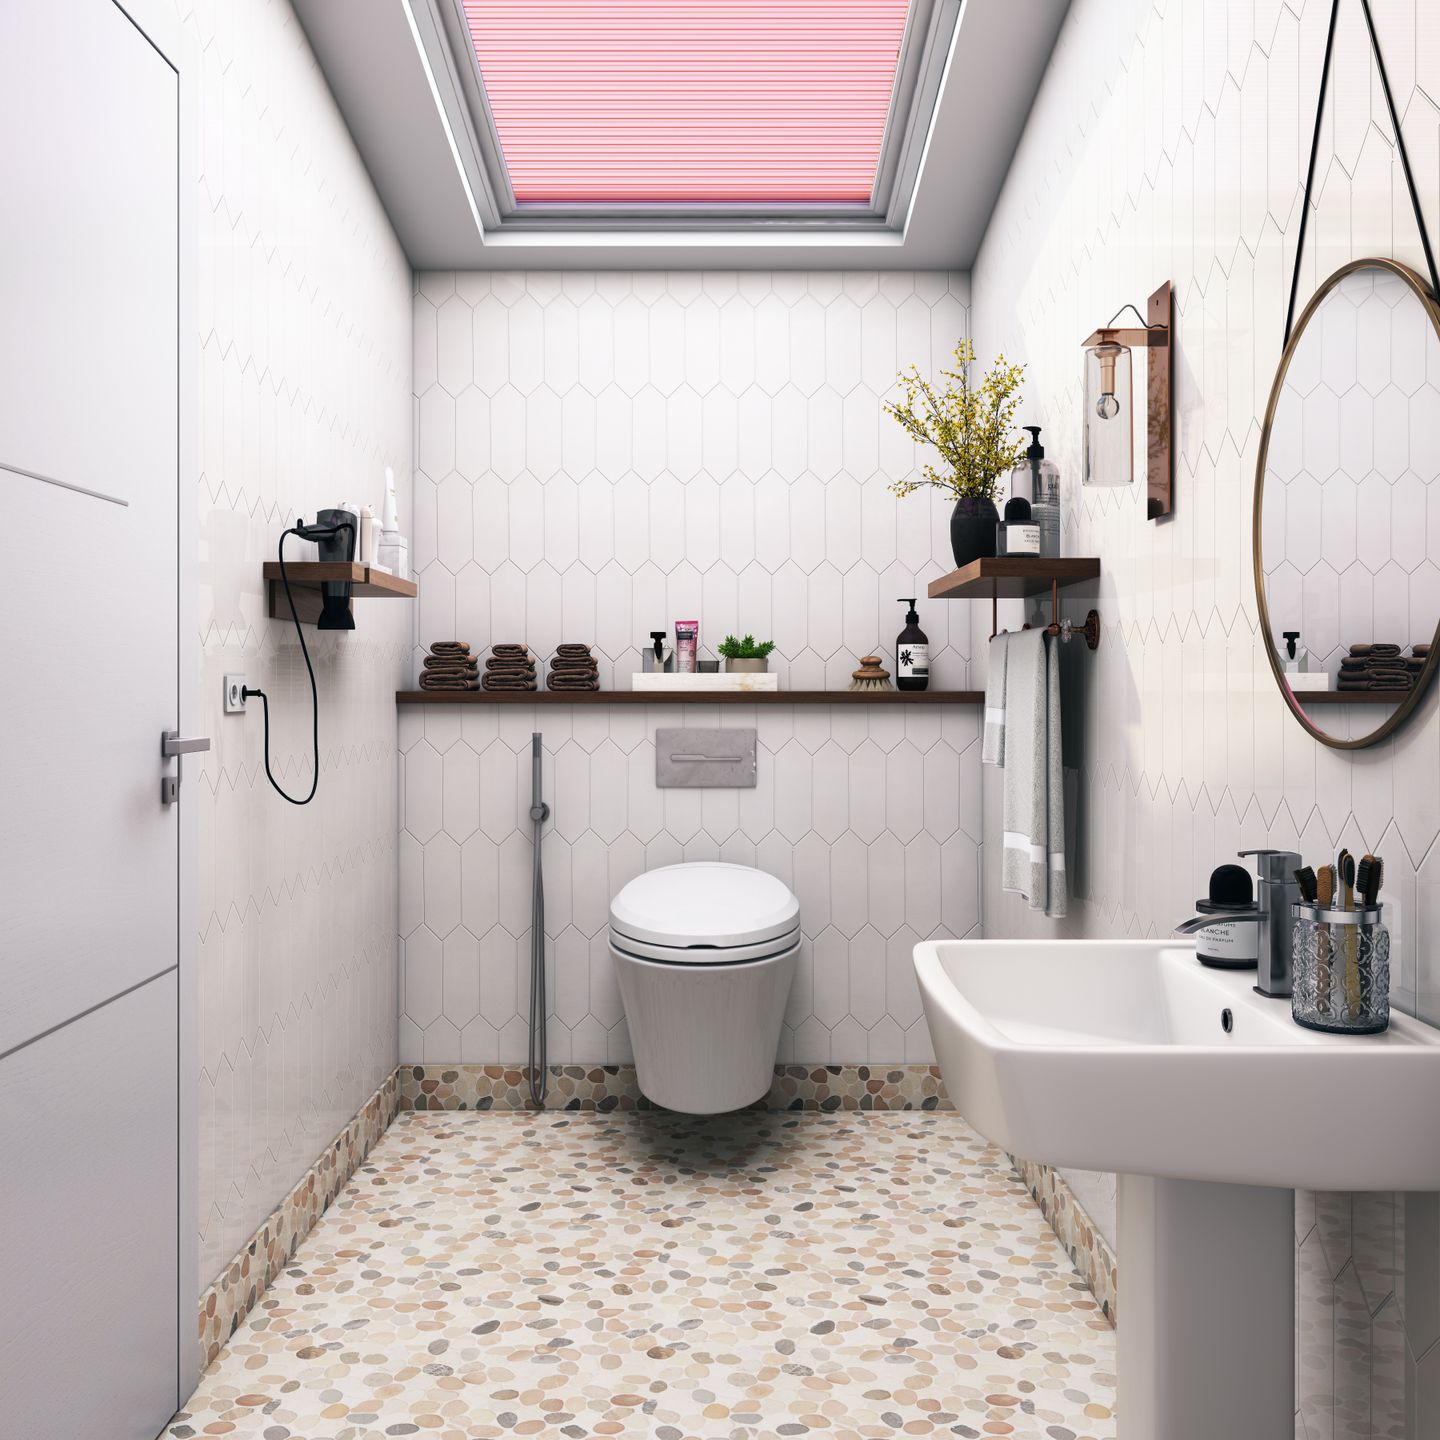 Compact Toilet With White Coloured Tiles - Livspace